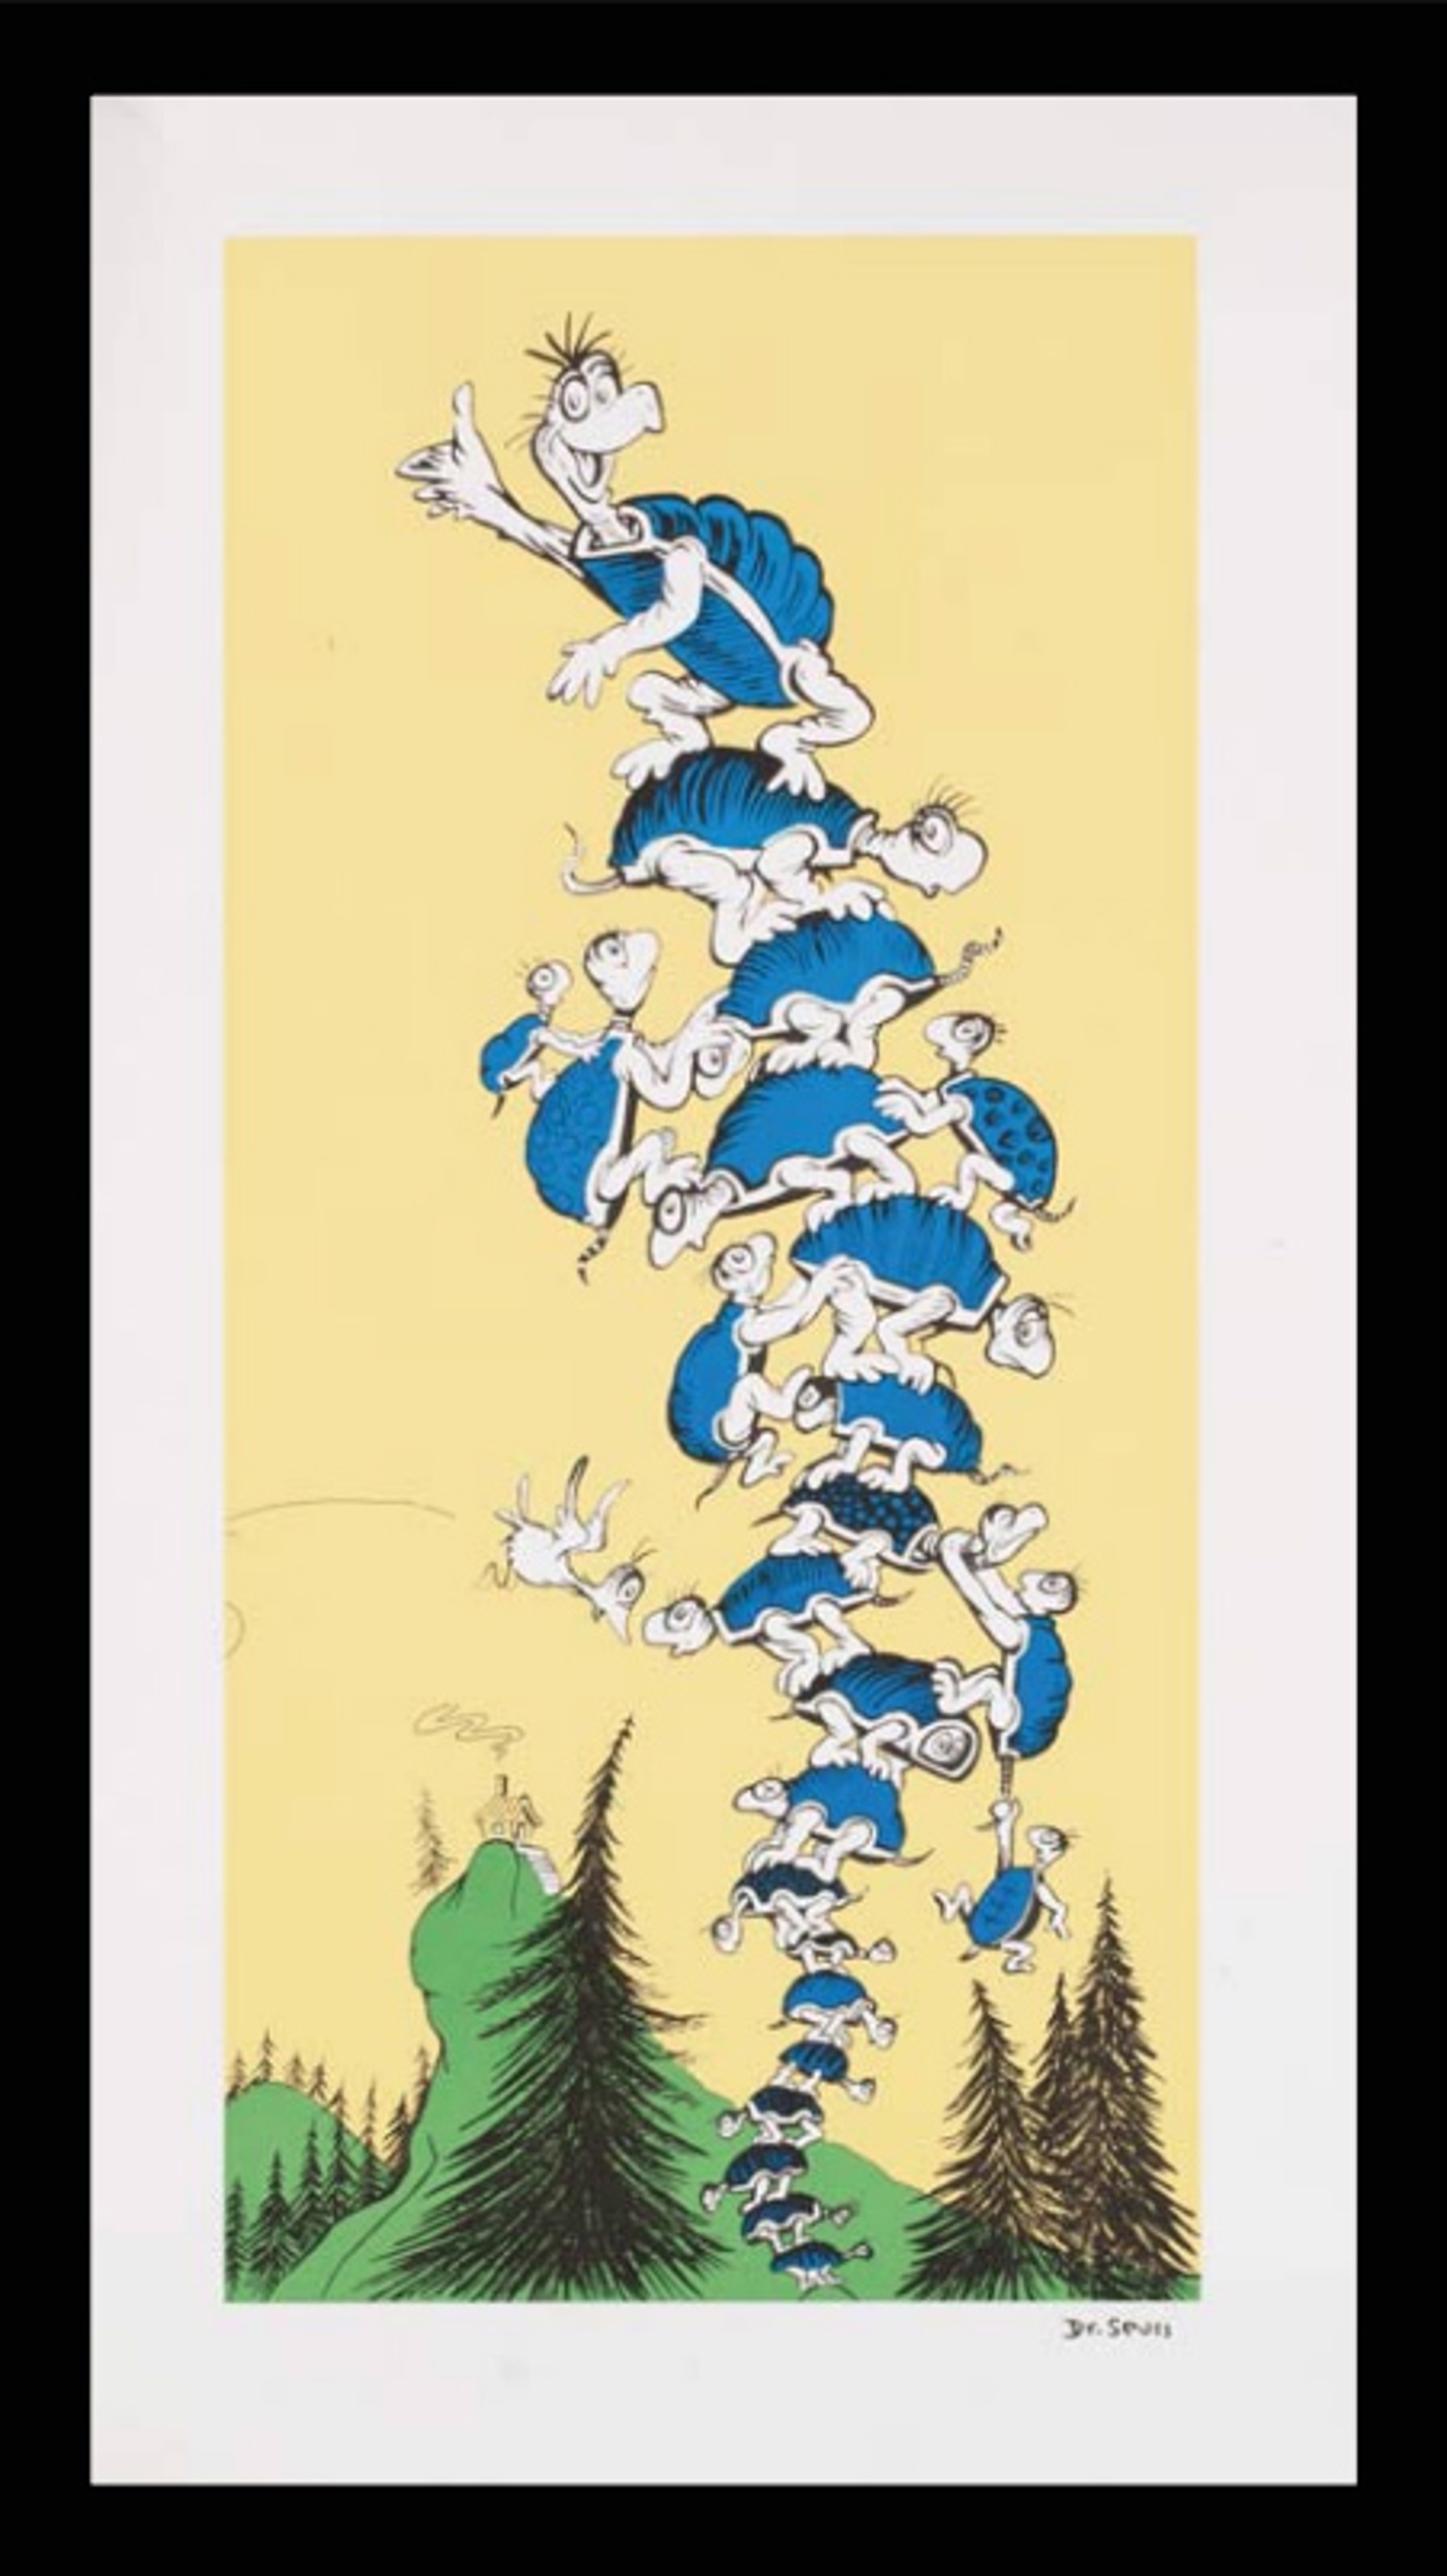 Turtle Tower by Dr. Seuss